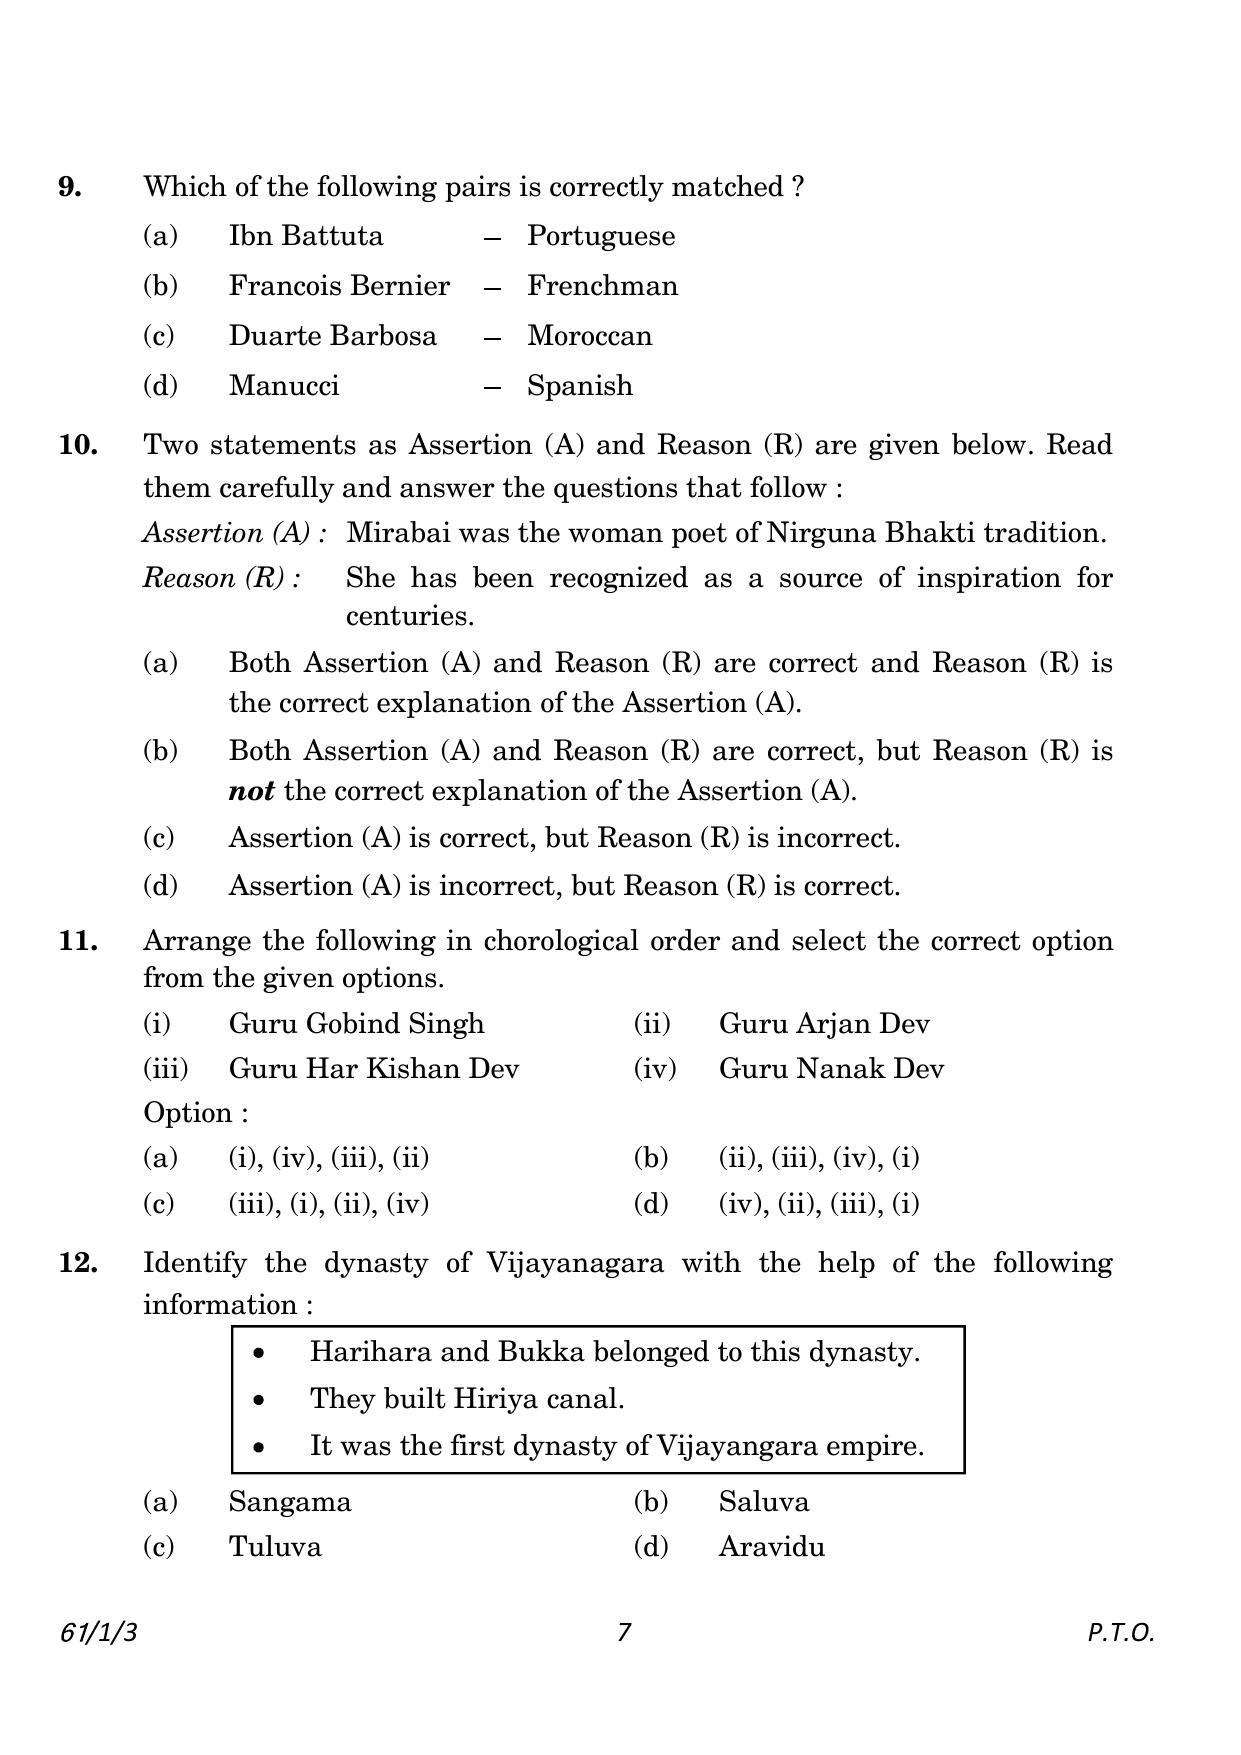 CBSE Class 12 61-1-3 History 2023 Question Paper - Page 7